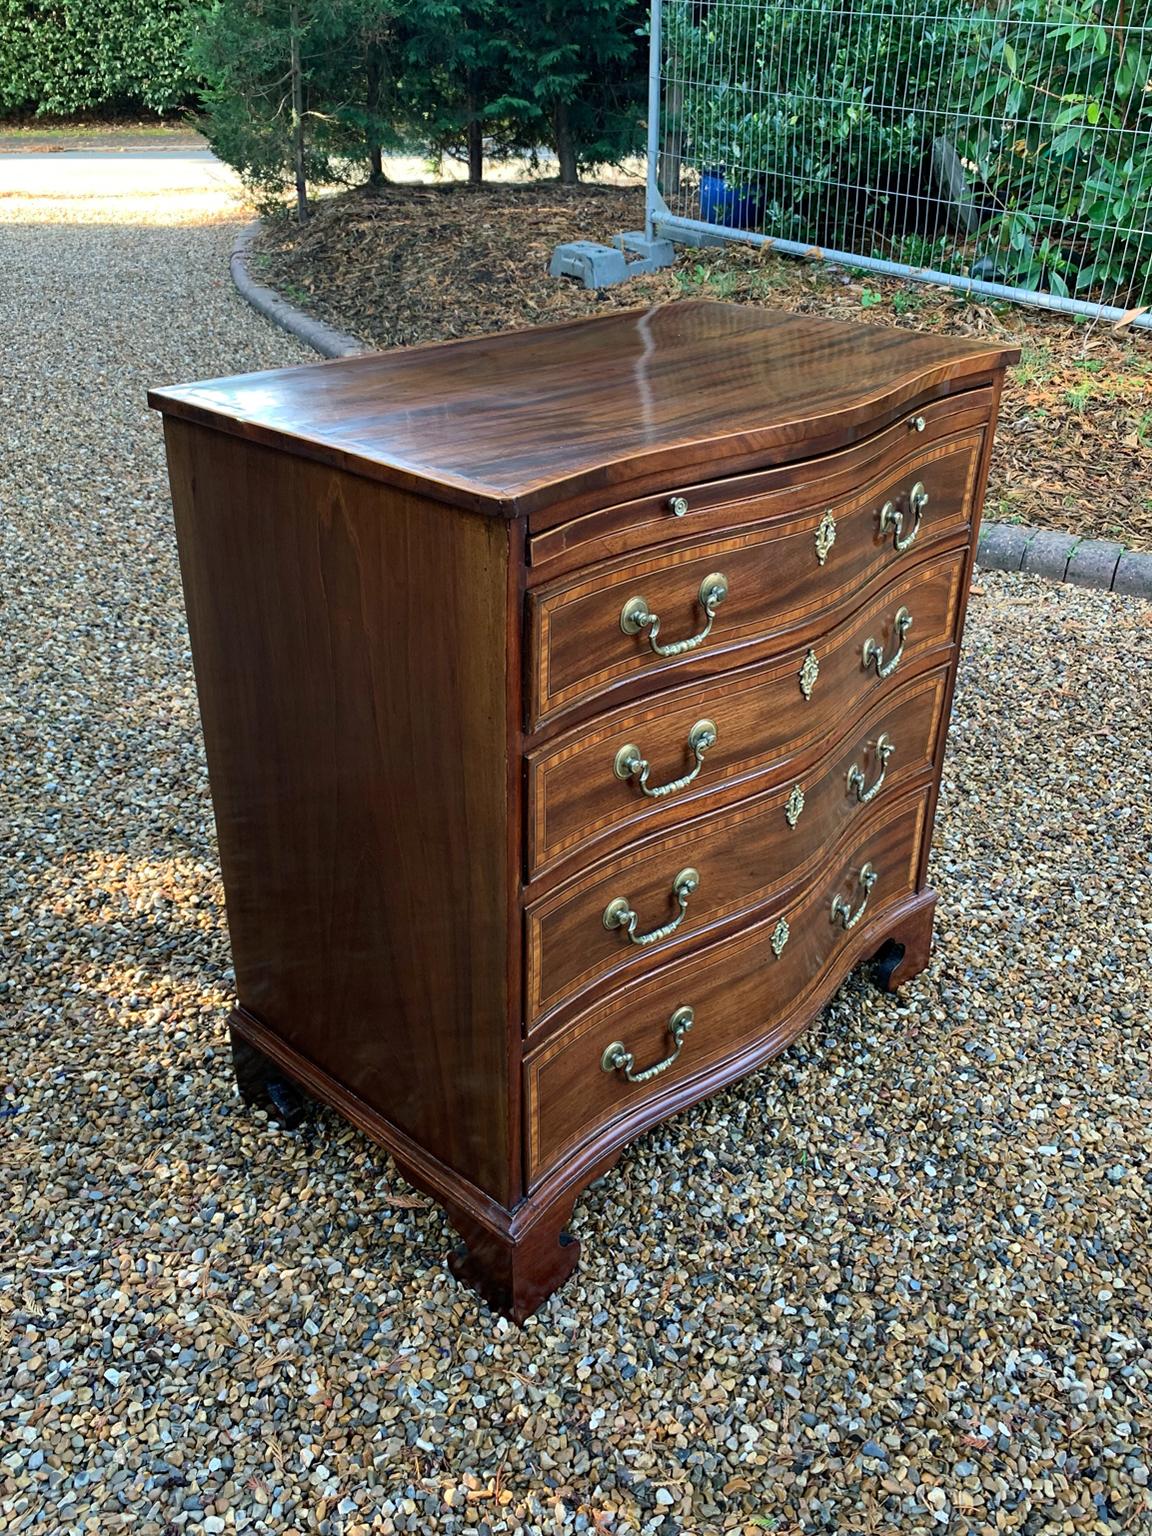 Georgian Mahogany Serpentine Chest Of Drawers, heavily inlaid with a brushing slide. Four long oak lined drawers and brass fittings throughout.

circa 1820.

Dimensions:
Height: 33 inches - 85 cms
Width: 31 inches - 79 cms
Depth: 18 inches -